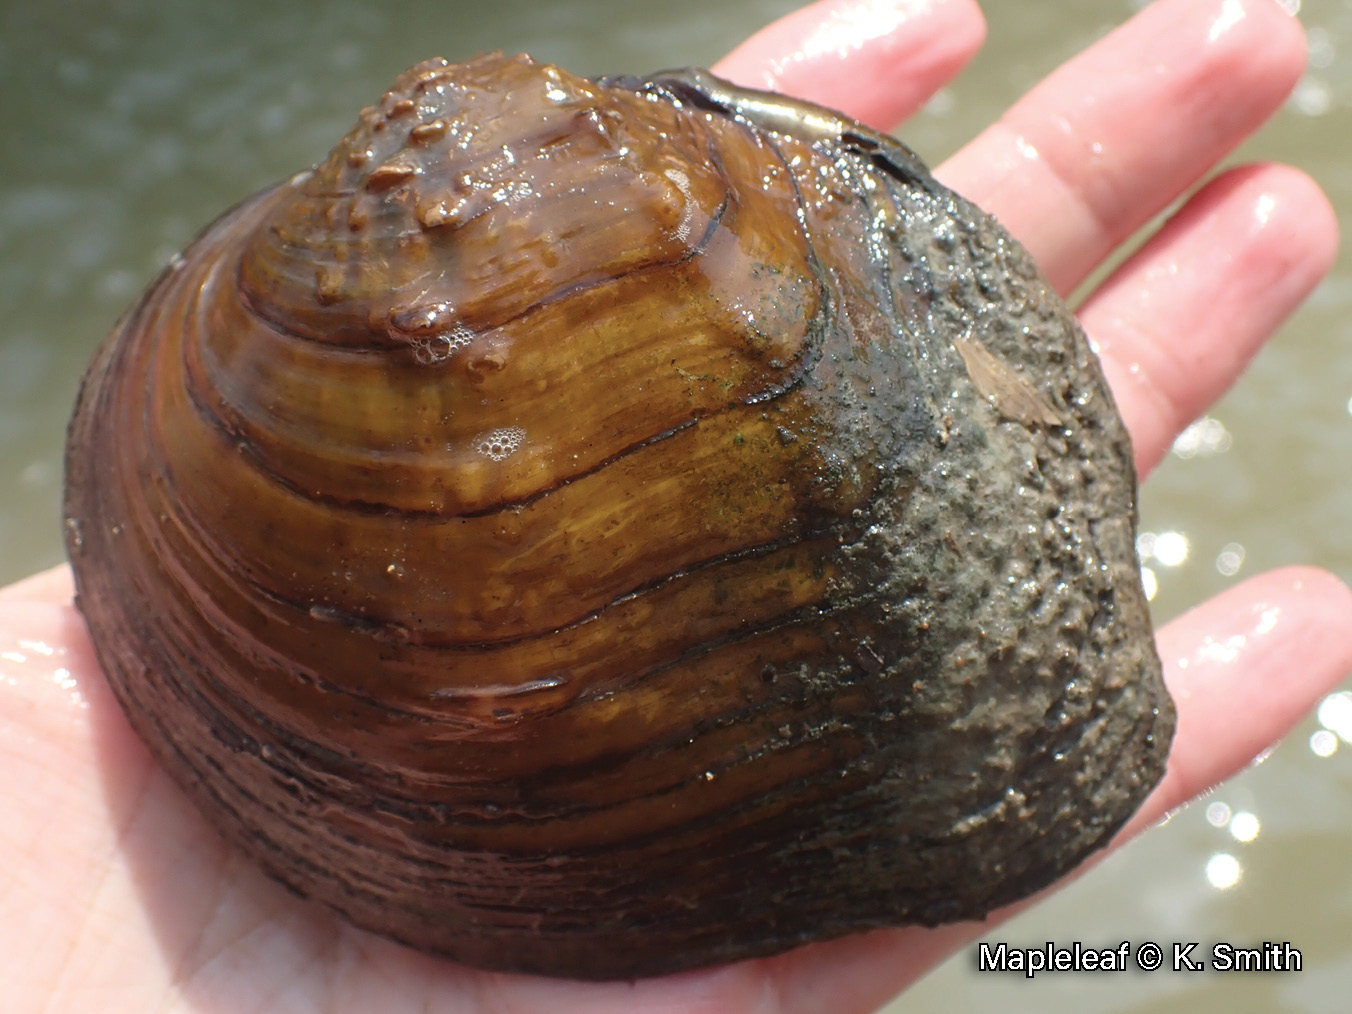 Picture of a mapleleaf mussel in a hand, an orangish-brown medium-sized mussel that has a wide, shallow indent between two rows of nodules